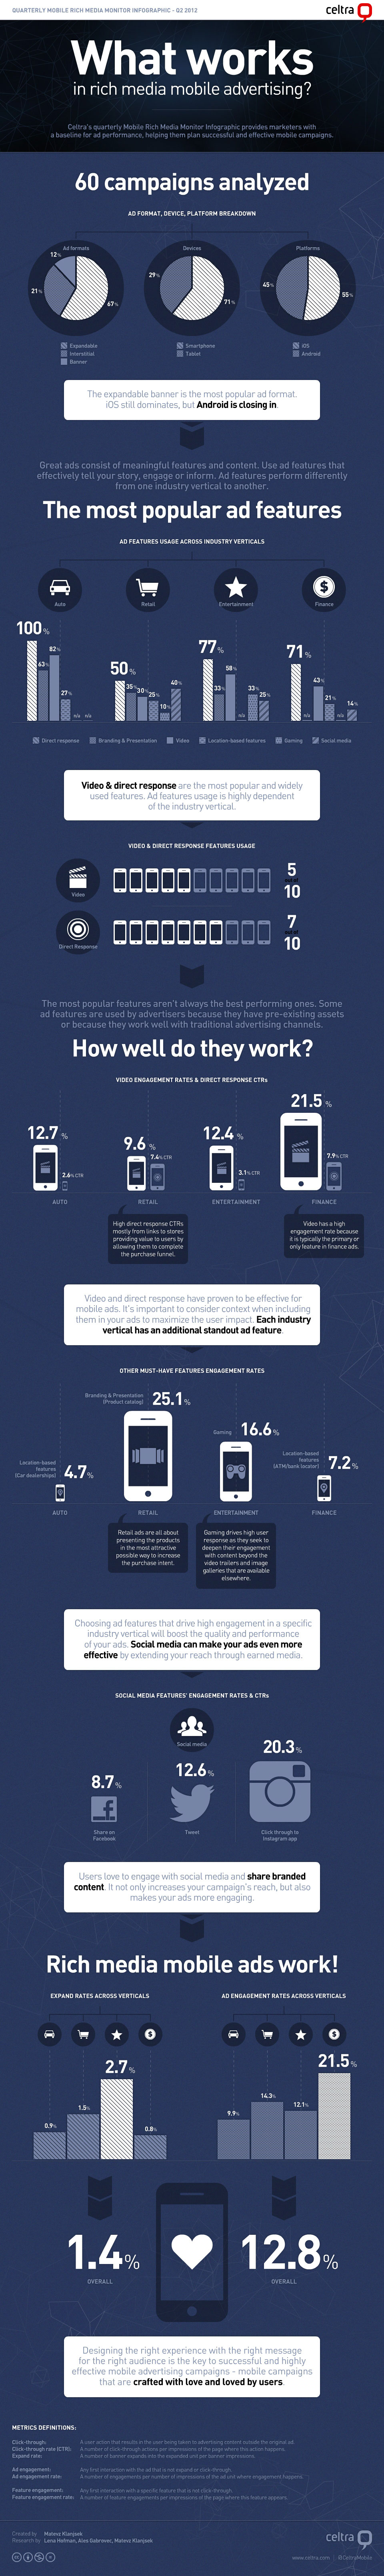 Rich Media Mobile Ads-Infographic